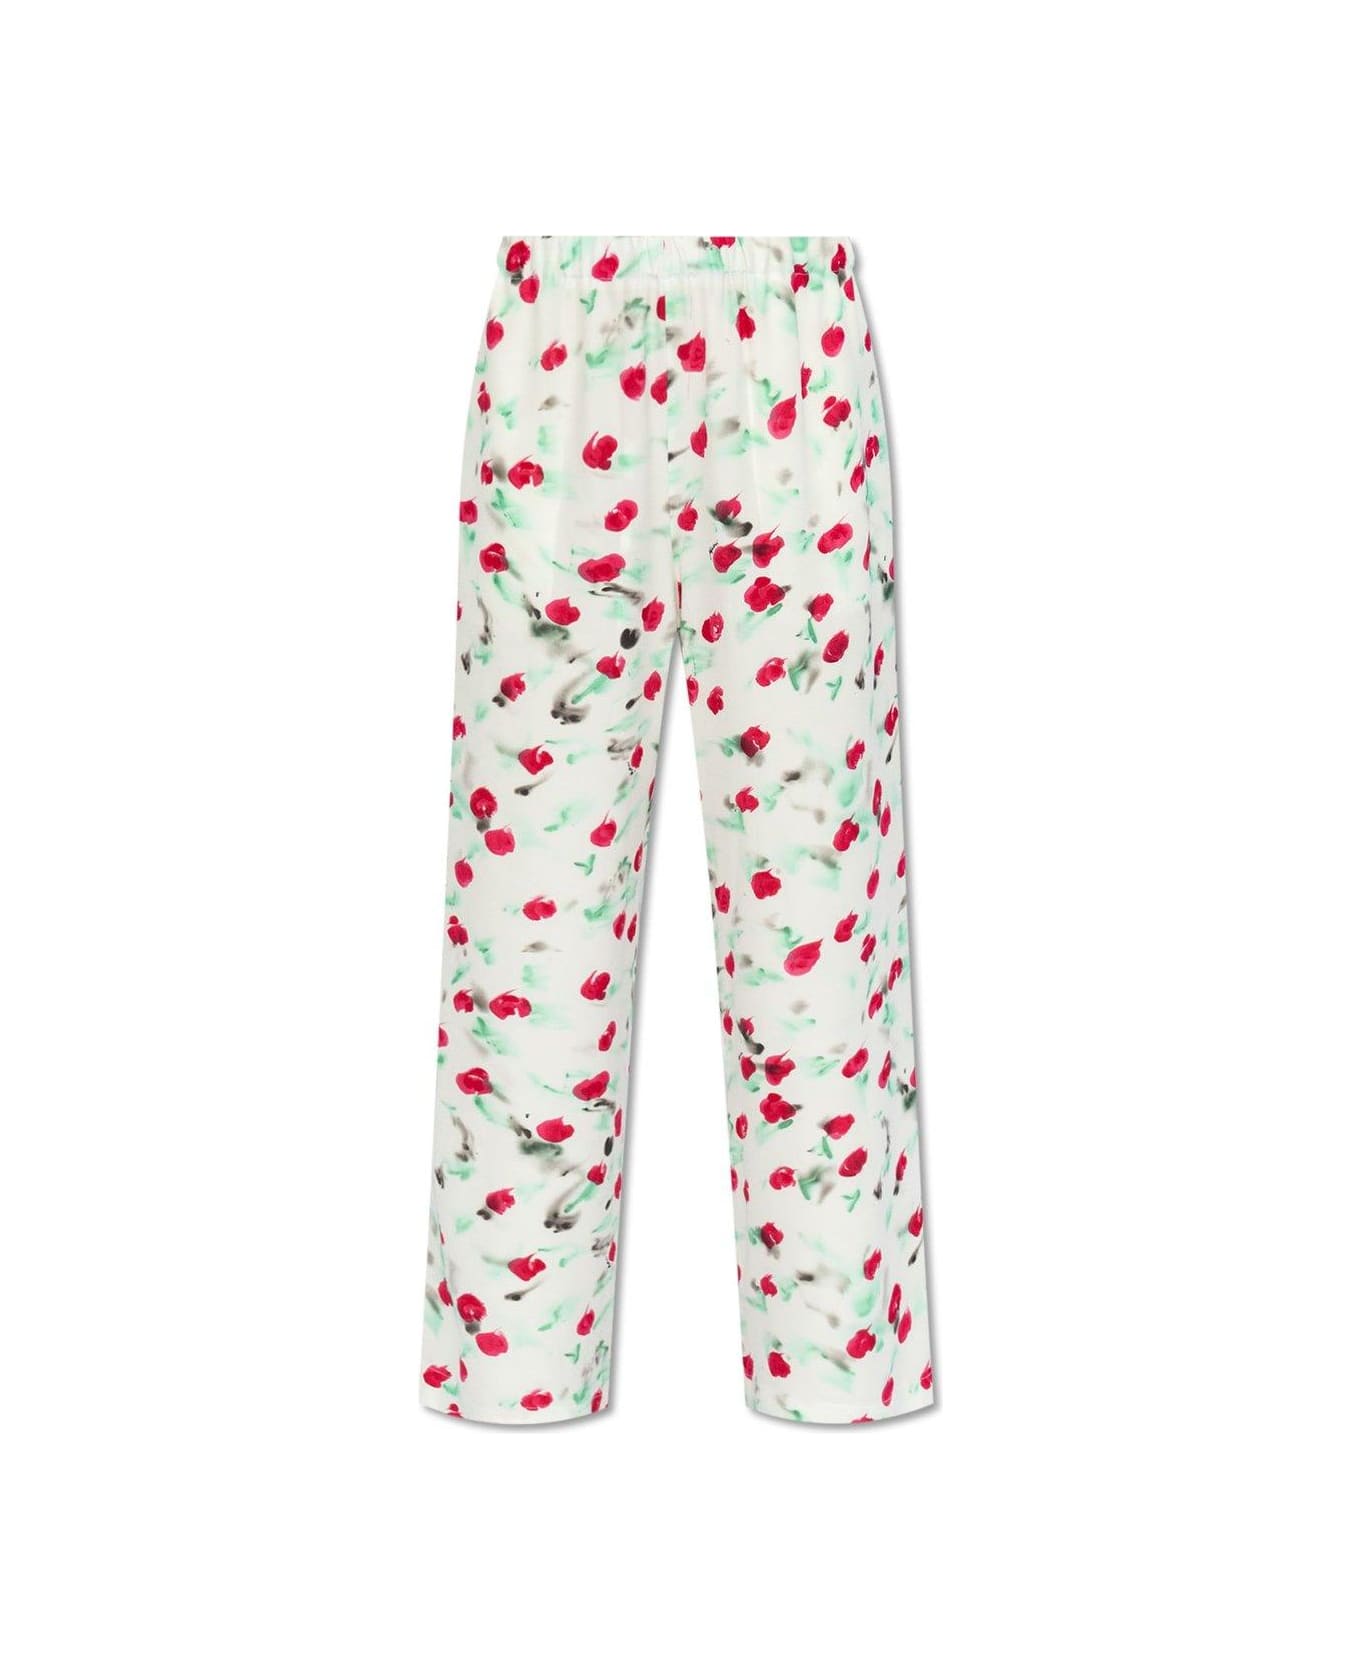 Marni Floral Printed Cropped Satin Trousers